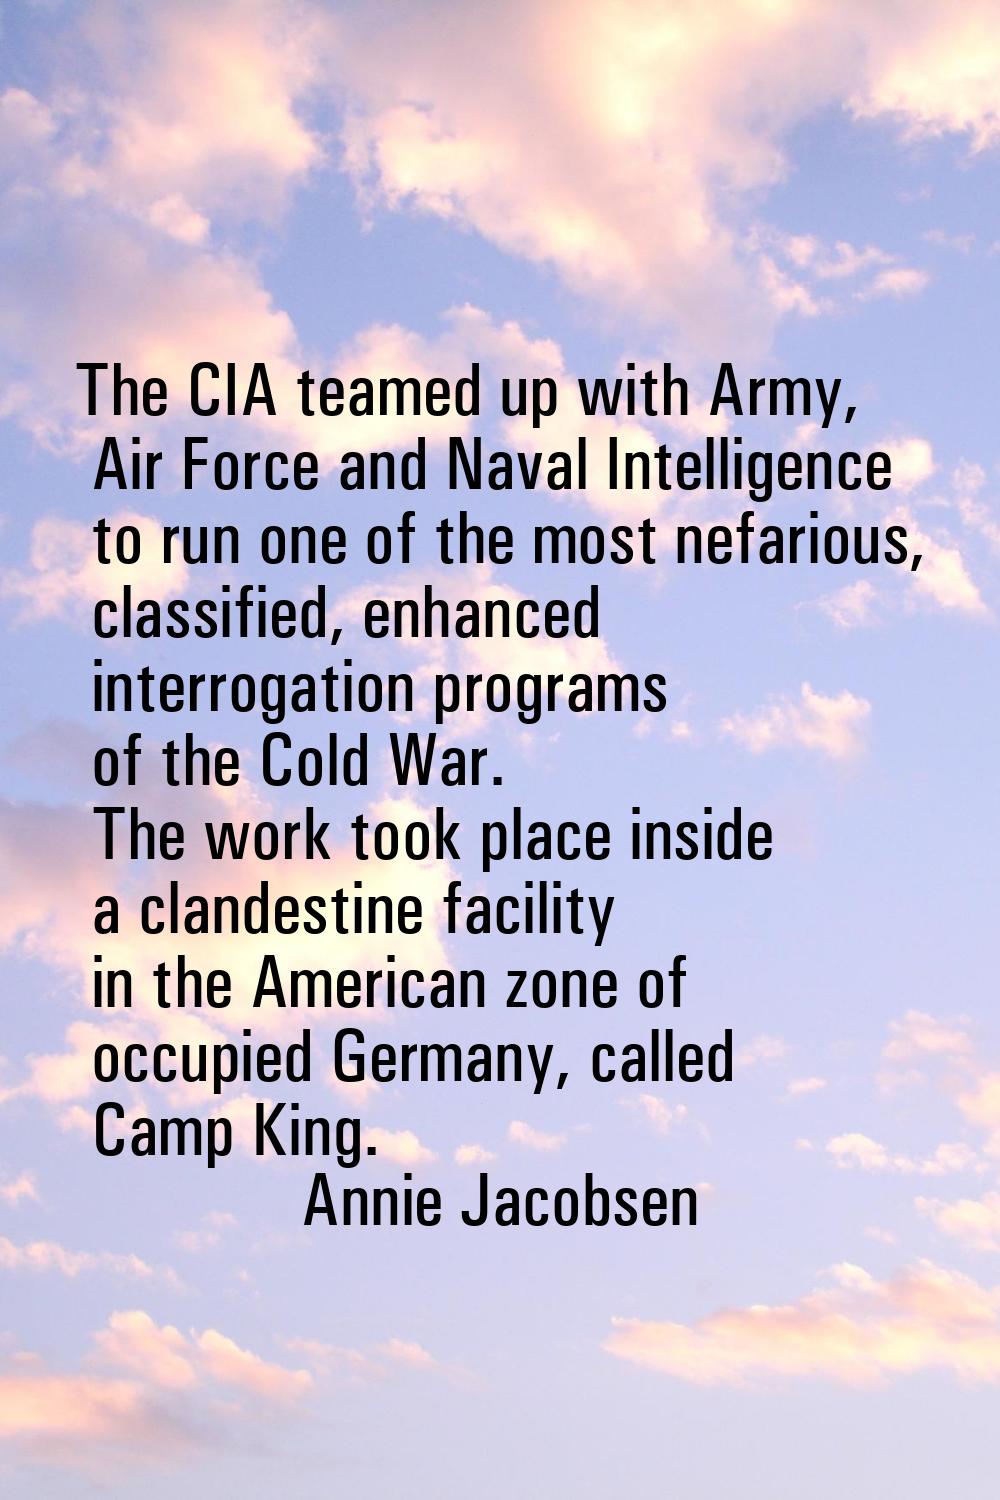 The CIA teamed up with Army, Air Force and Naval Intelligence to run one of the most nefarious, cla